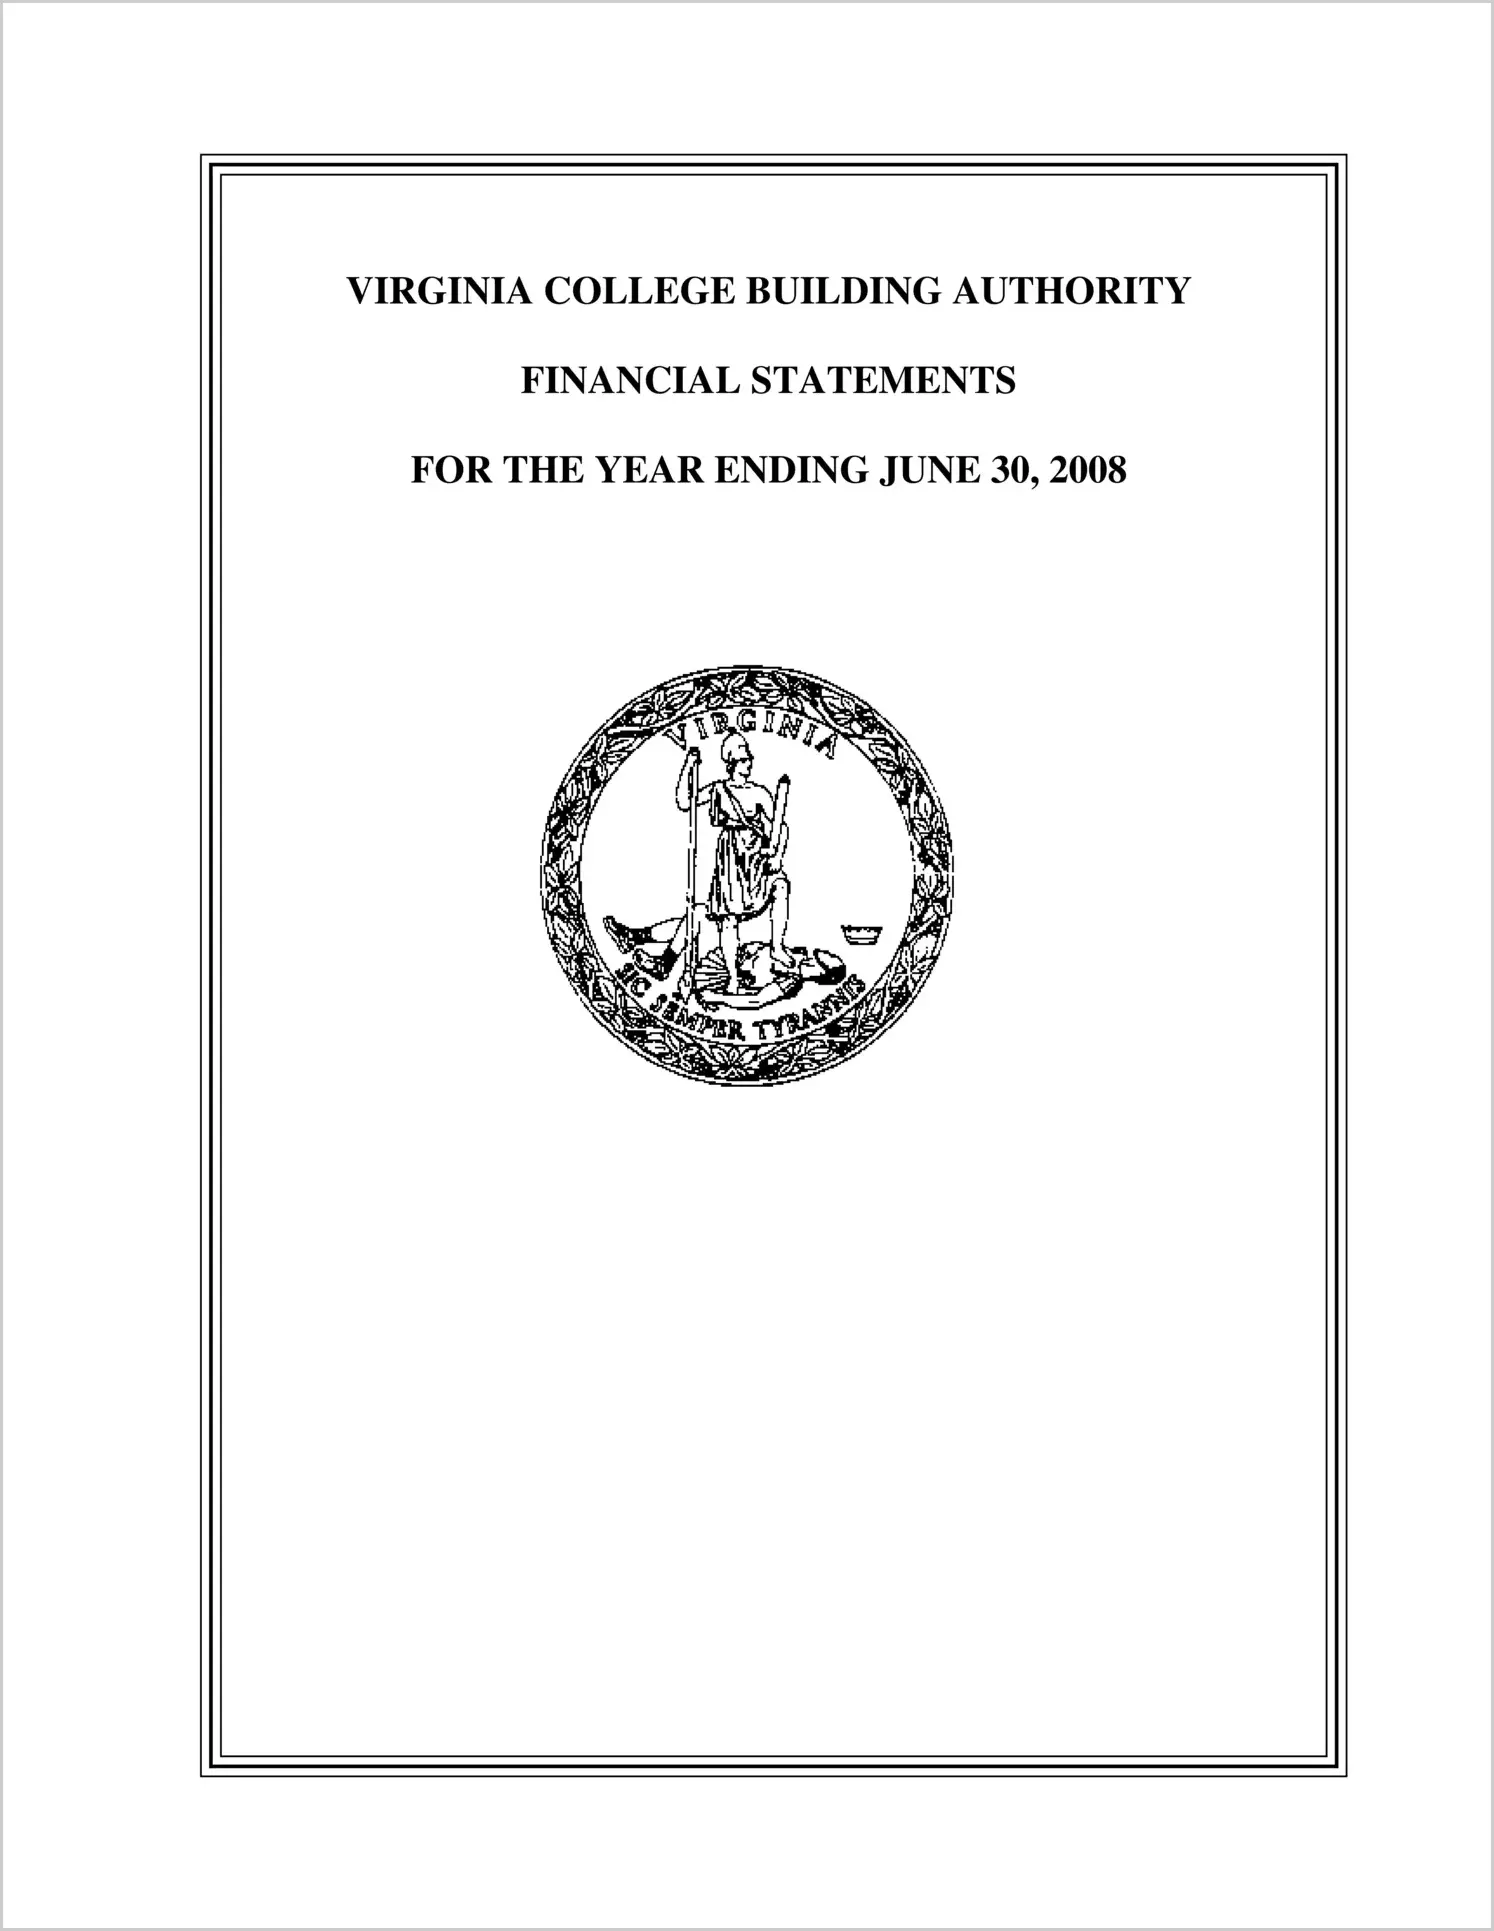 Virginia College Building Authority for the year ended June 30, 2008